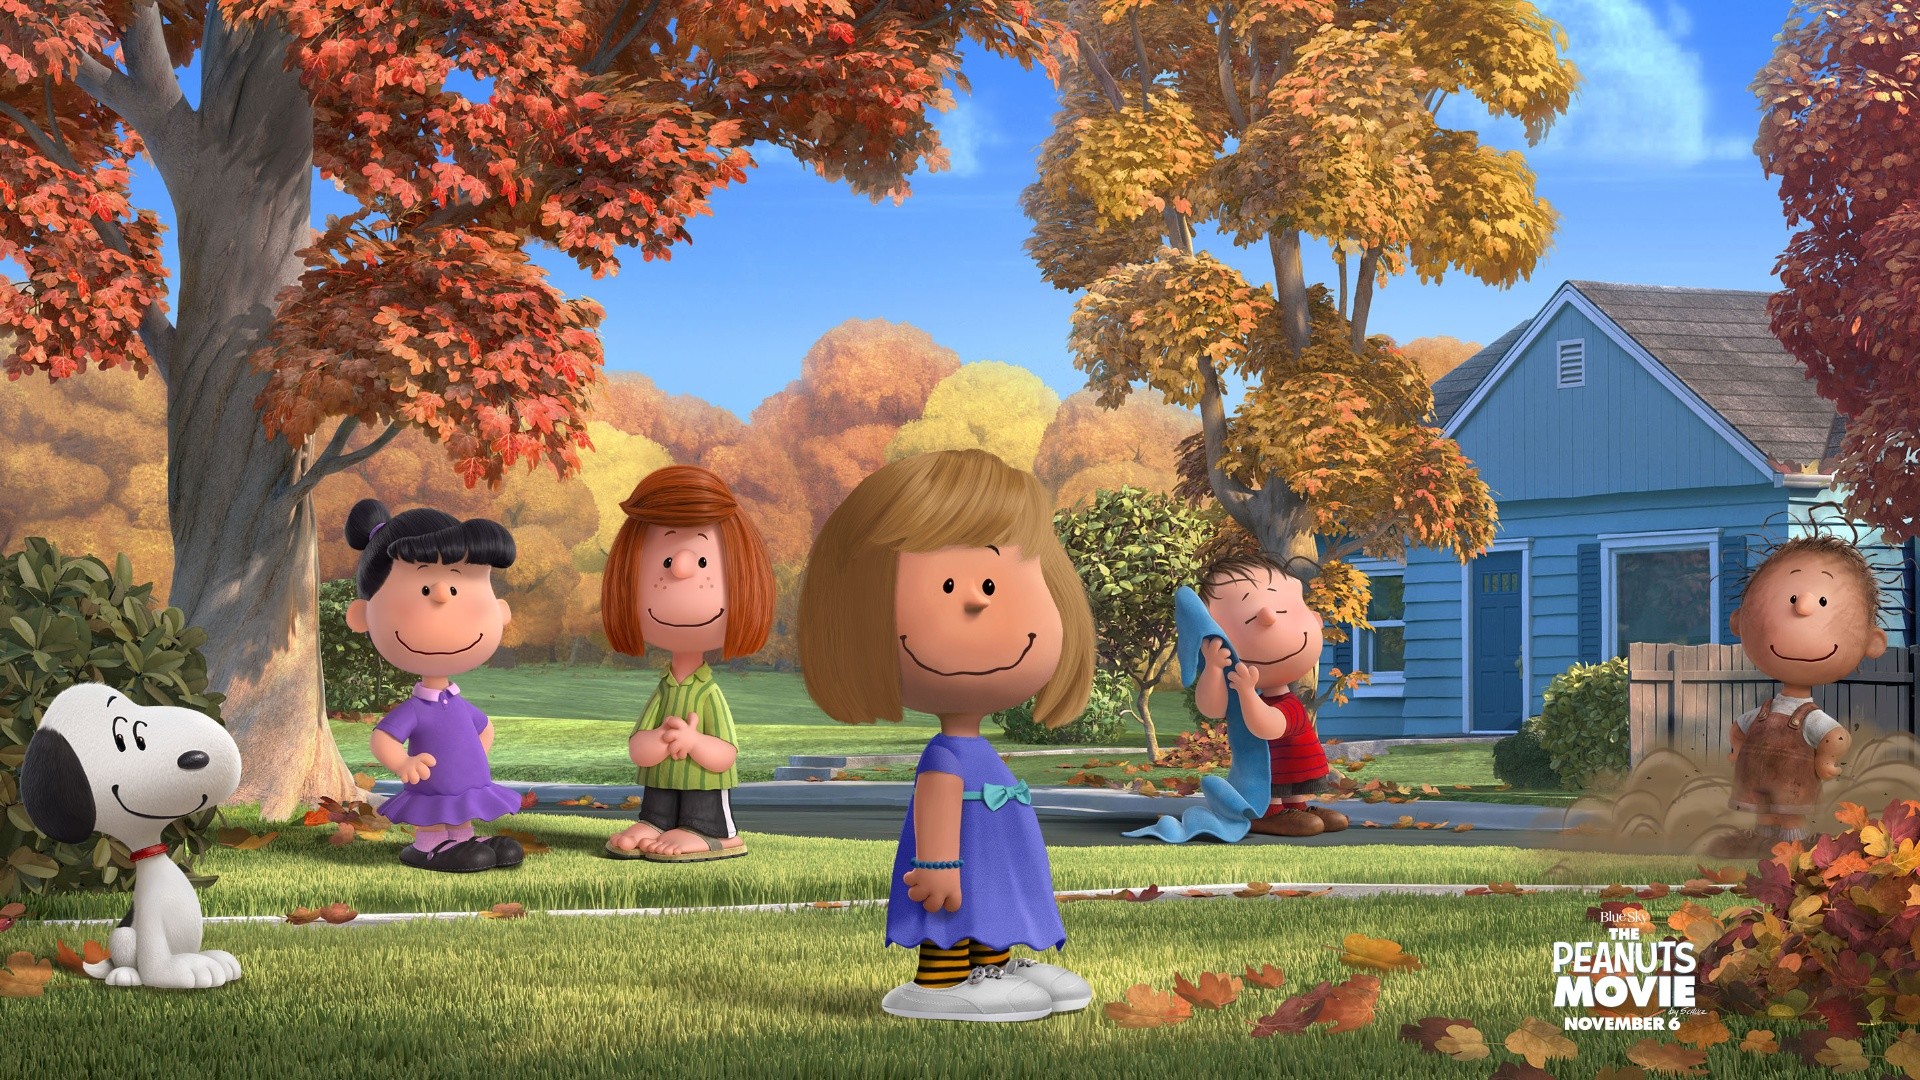 1920x1080 Try The Peanutize Me Character Creator For THE PEANUTS MOVIE - We Are Movie  Geeks